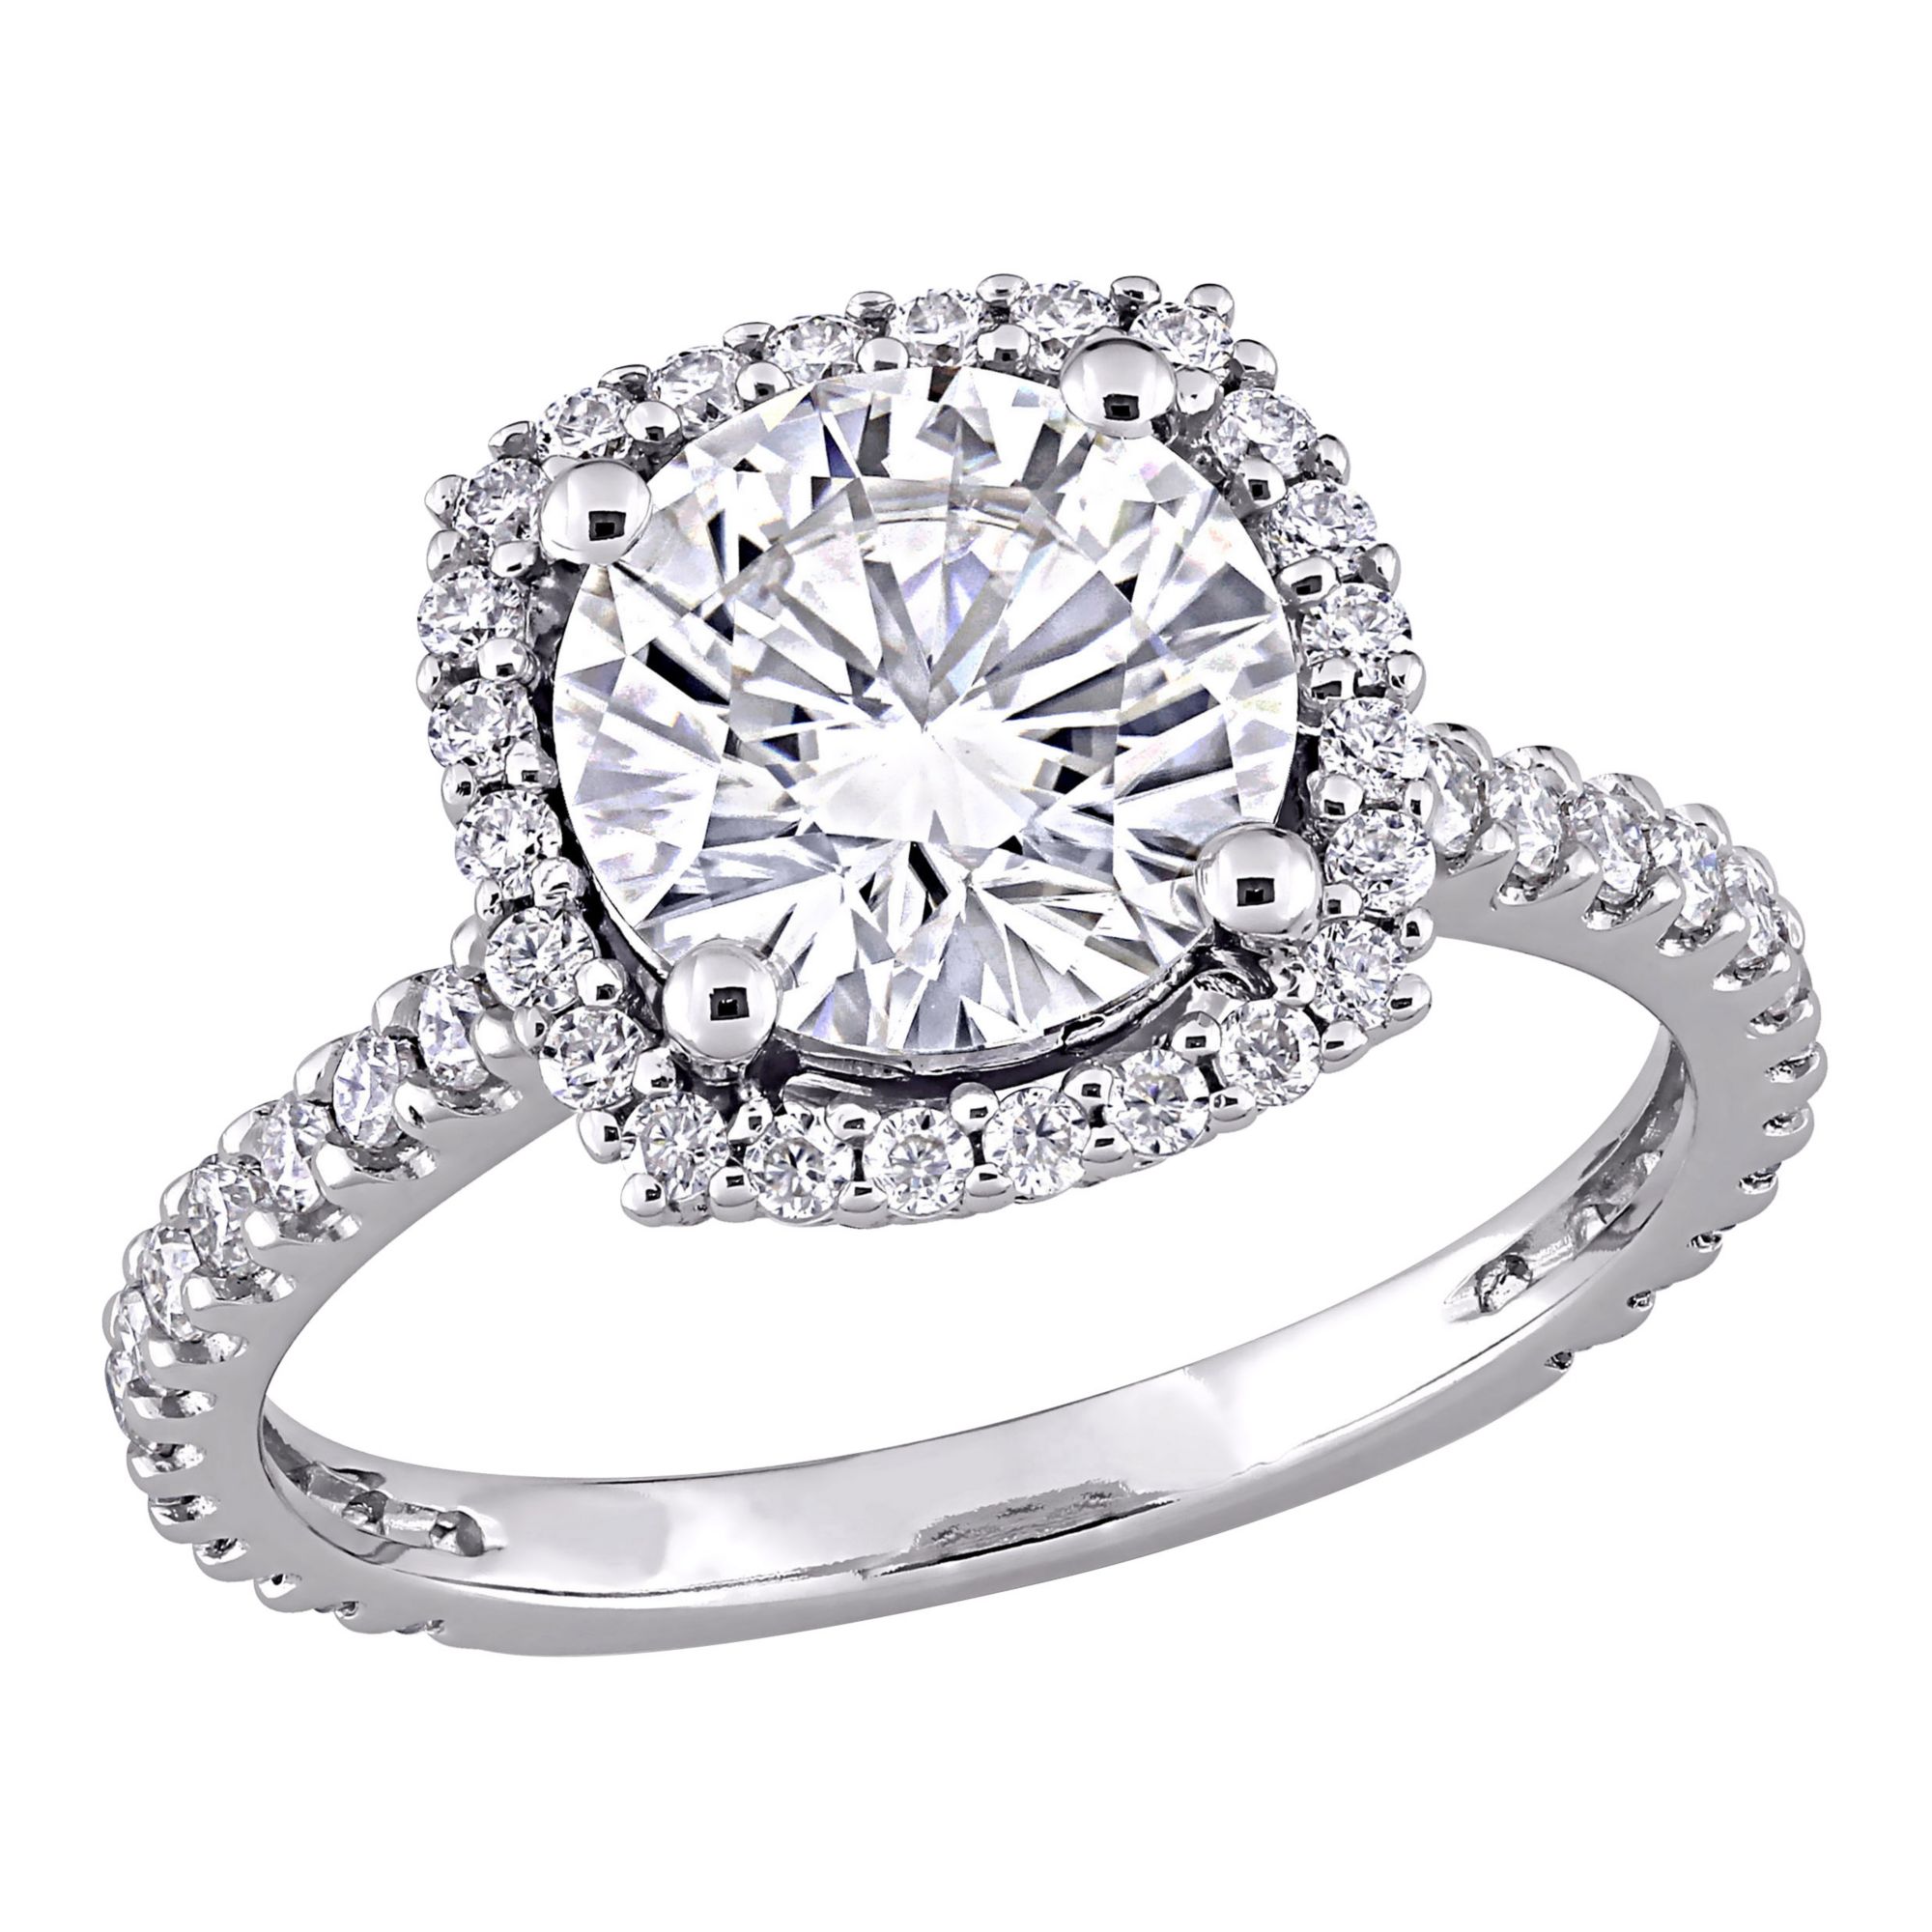 2.5 ct. DEW Created Moissanite Halo Engagement Ring in 10k White Gold - Size 8